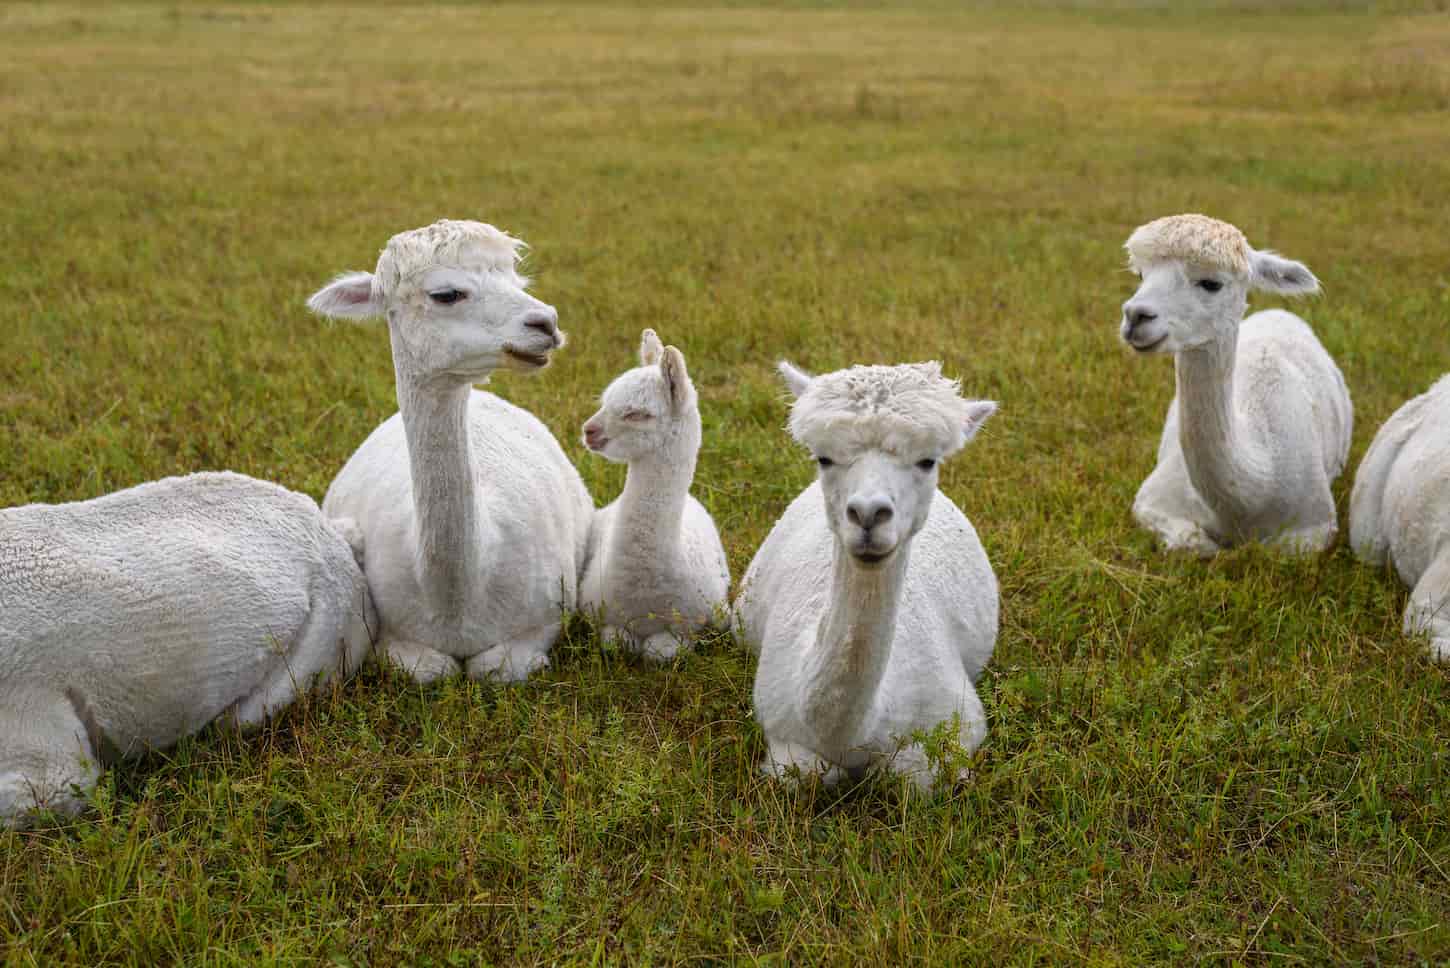 An image of alpacas laying down in the grass field.